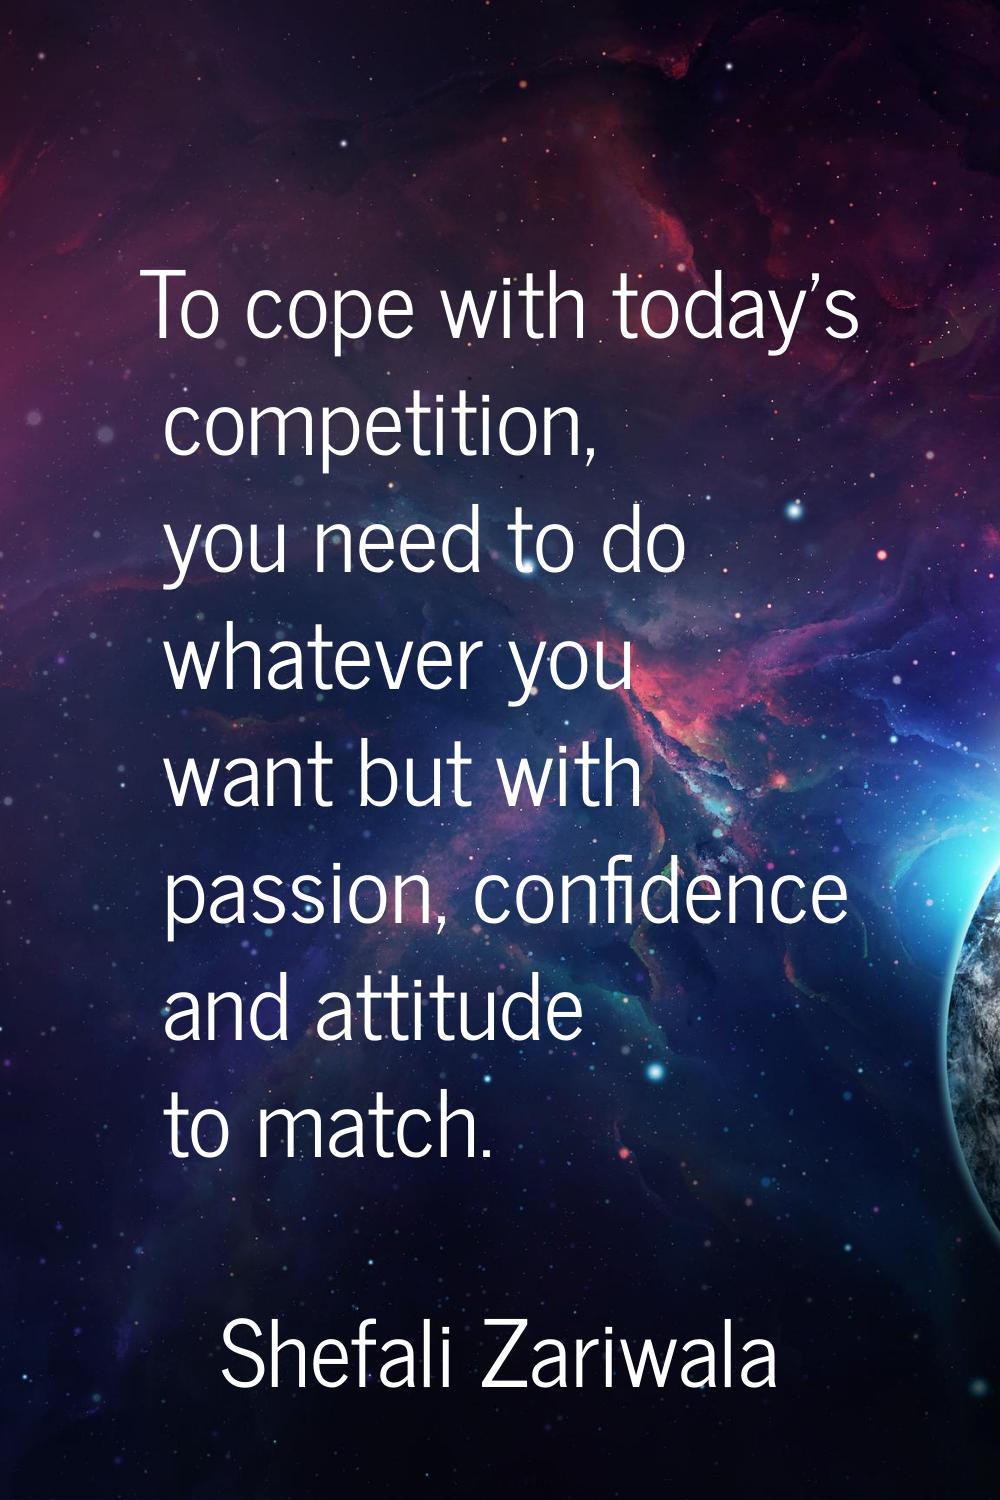 To cope with today's competition, you need to do whatever you want but with passion, confidence and